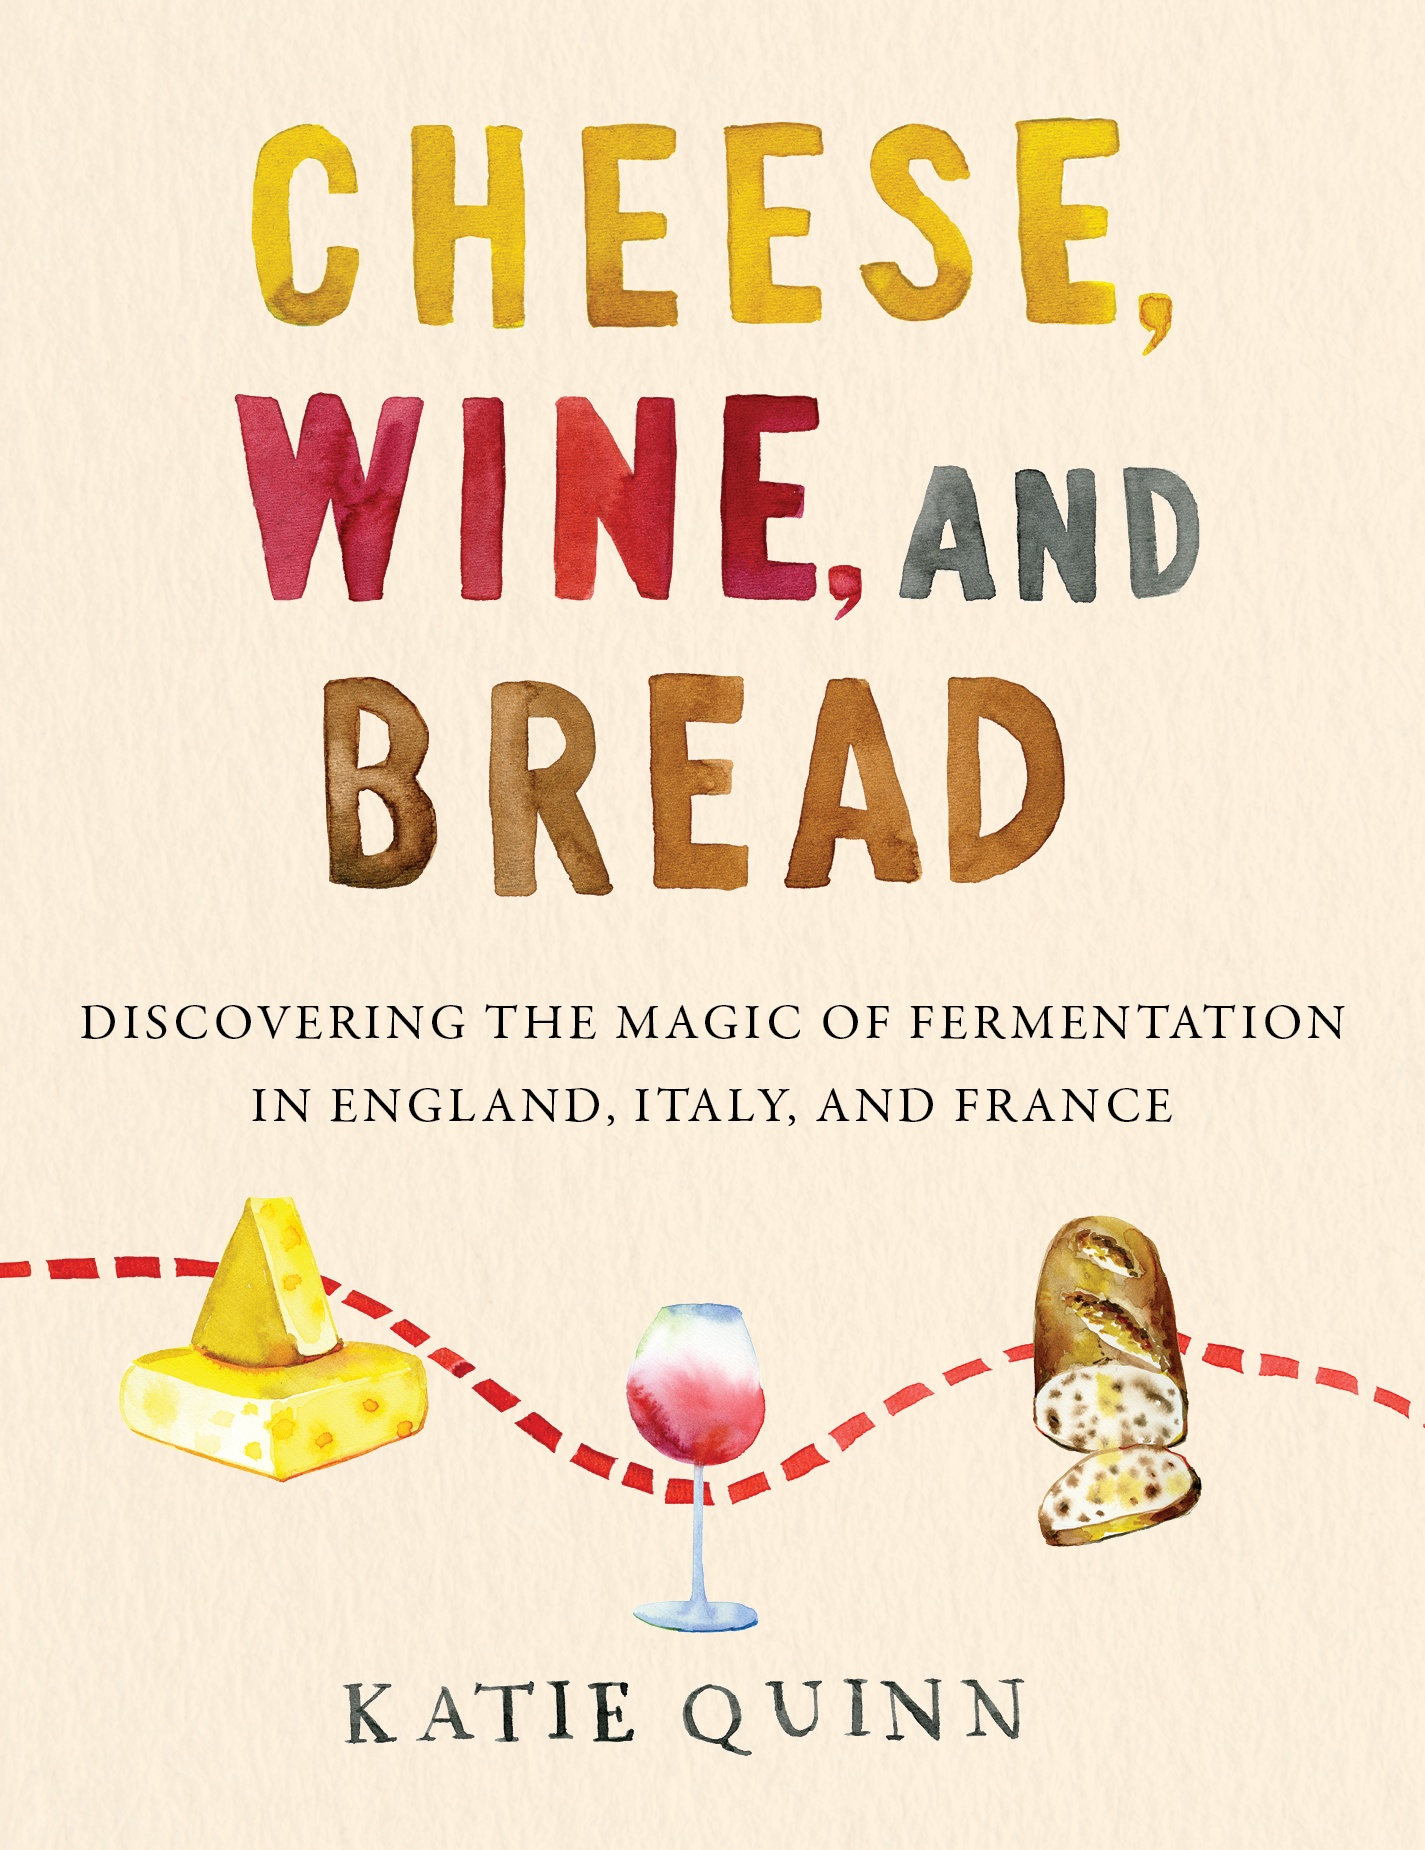 Cover of Katie Quinn's book, "Cheese, Wine, and Bread."